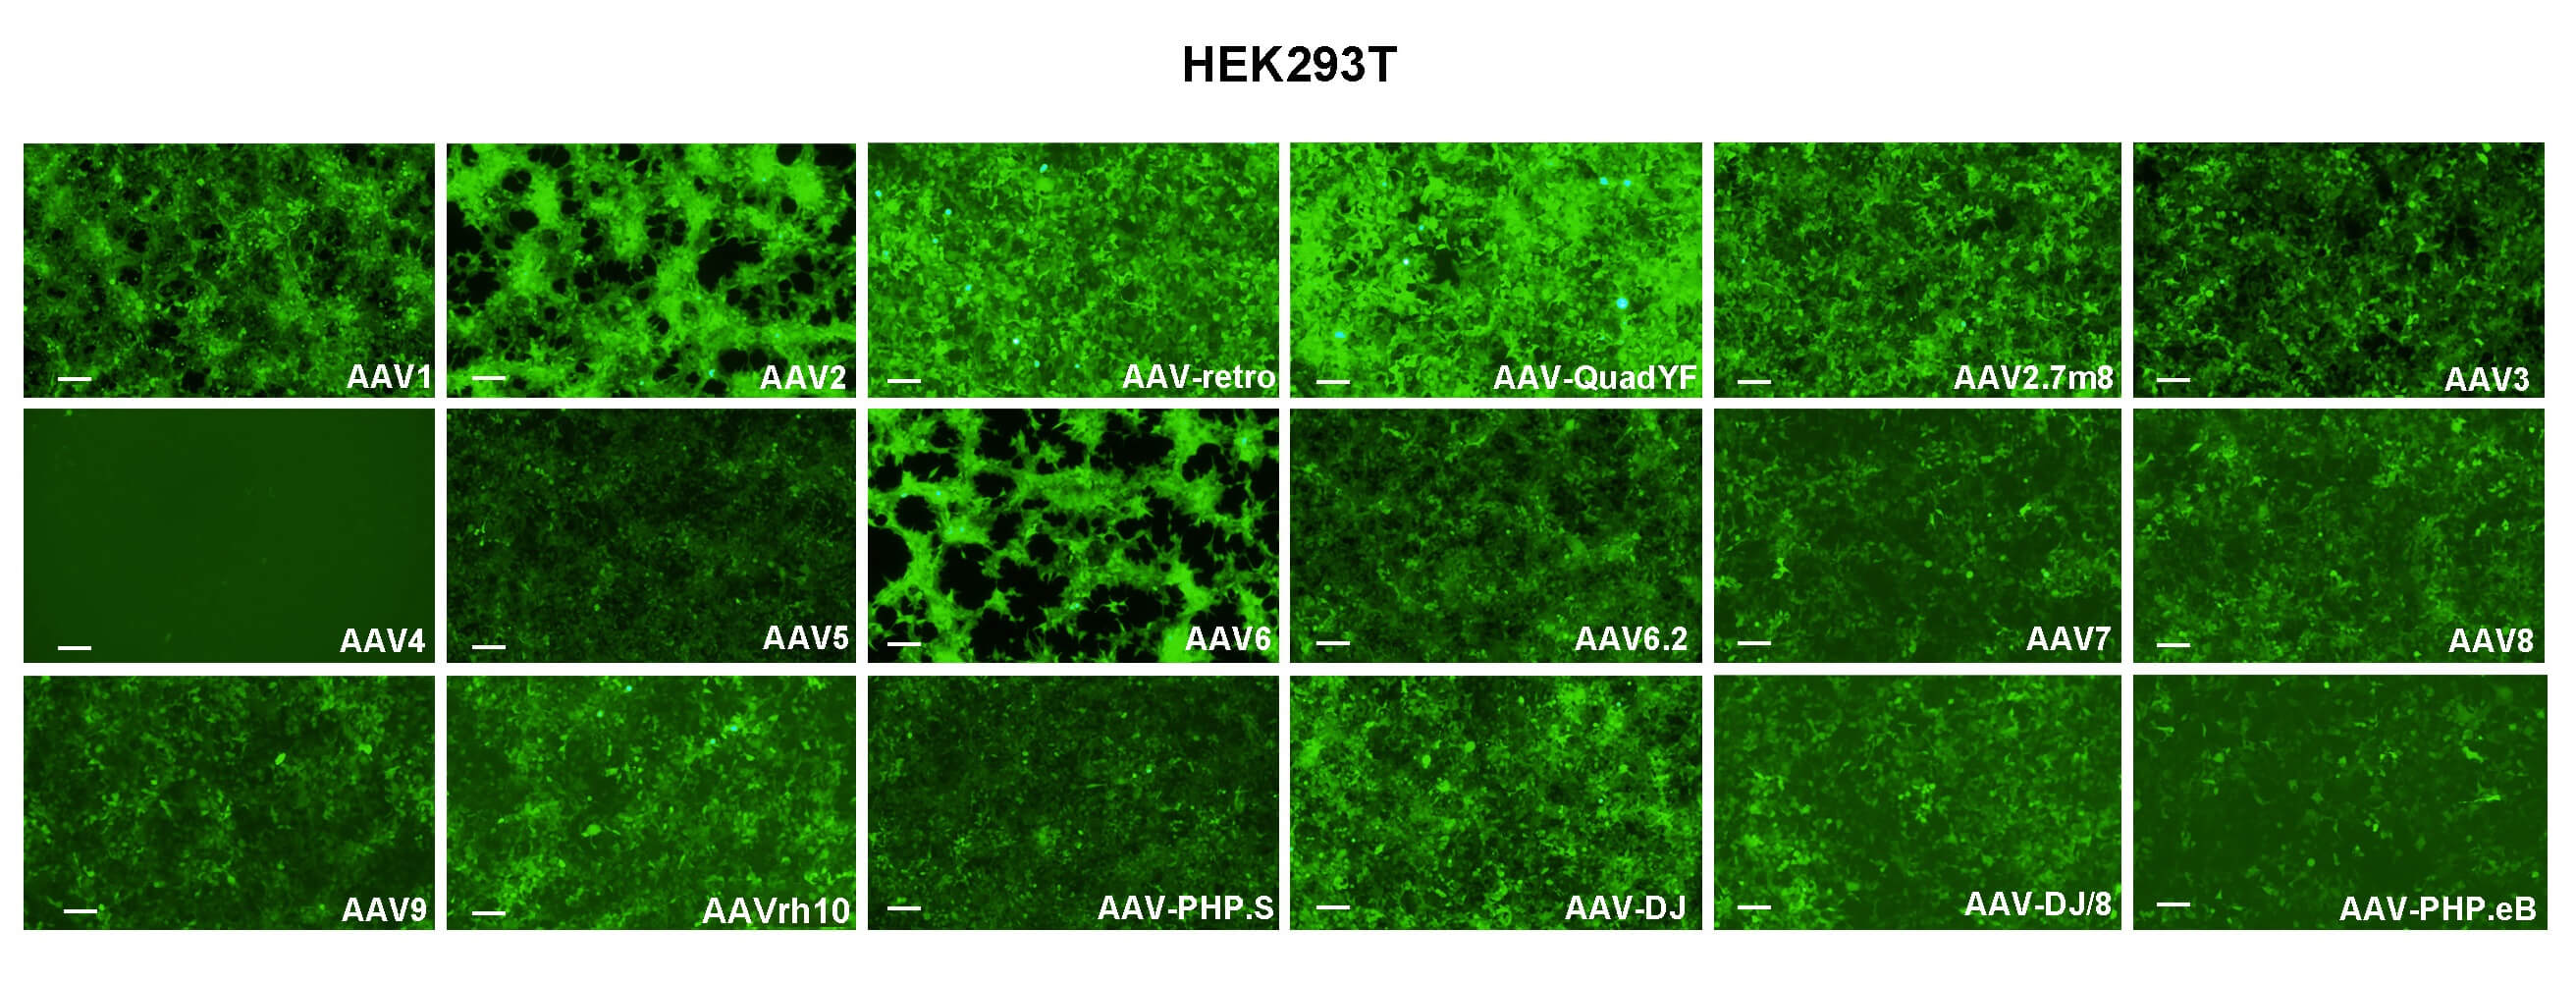 HEK293T cells were transduced with 18 serotypes of recombinant AAVs and presented strong EGFP fluorescent signals.